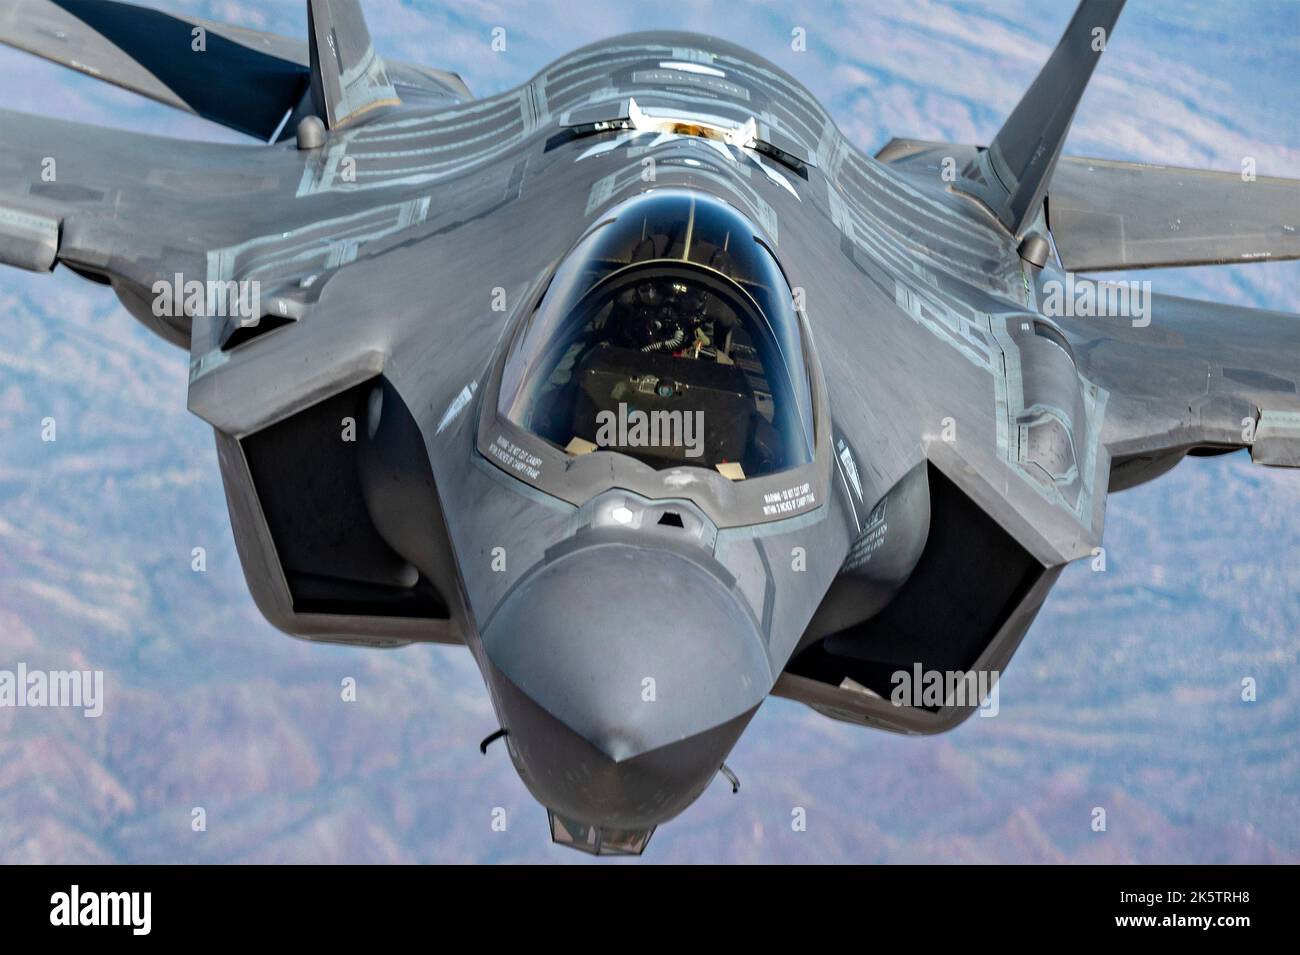 Phoenix, United States. 16 September, 2022. A U.S. Air Force F-35A Lightning II stealth fighter aircraft approaches to refuel from a USAF KC-135 Stratotanker aircraft during a local training sortie, at Luke Air Force Base, September 16, 2022 near Phoenix, Arizona. Stock Photo